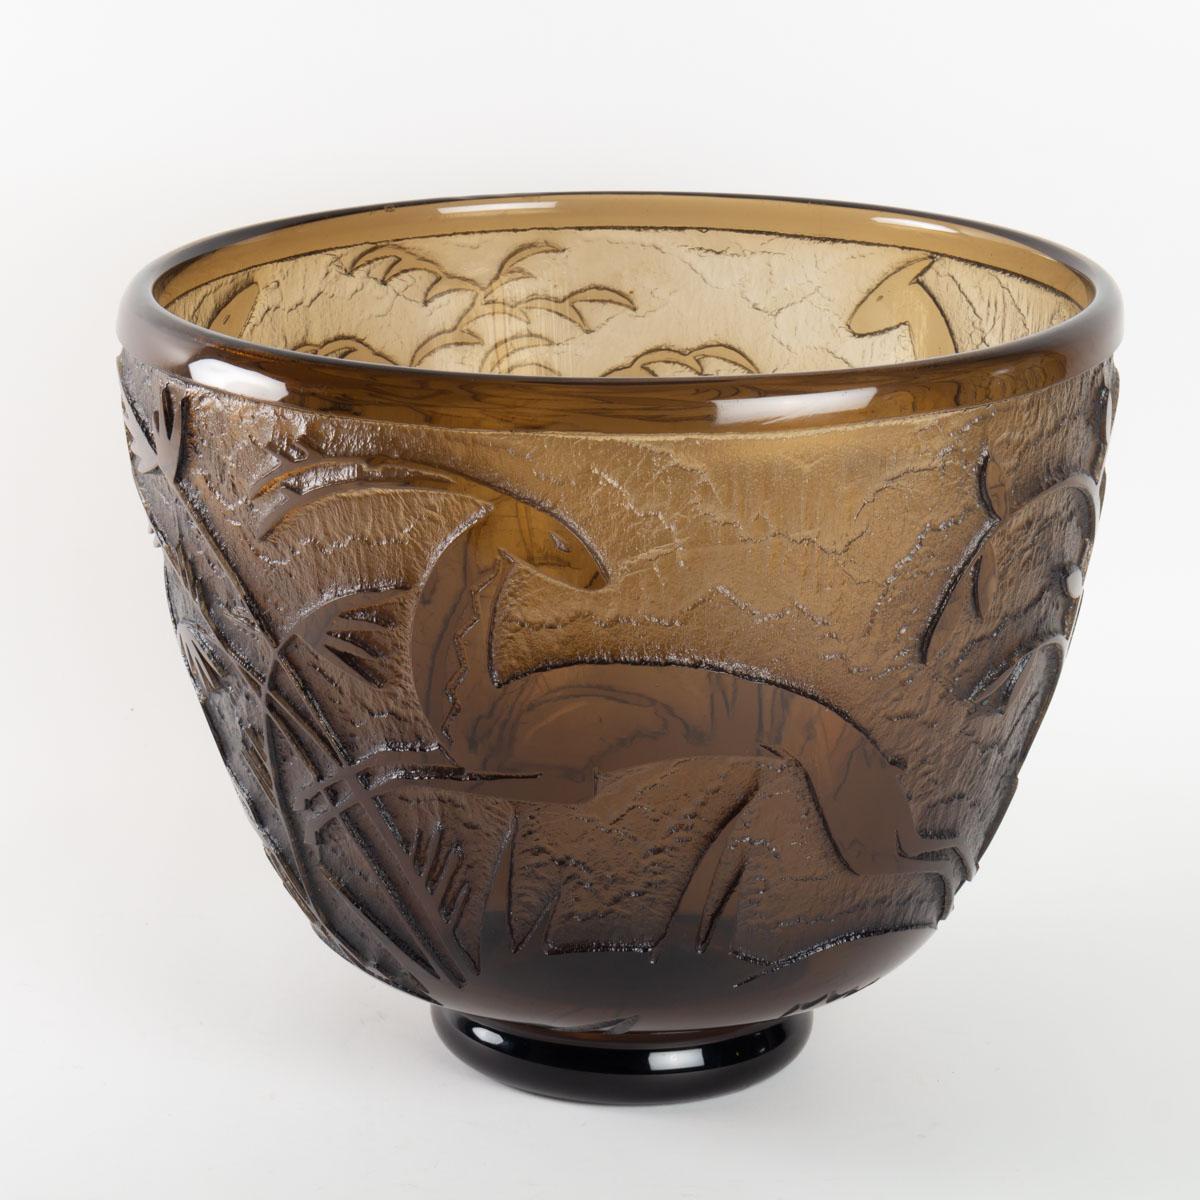 Exceptional monumental glass vase made by Daum in 1930s in topaz acid etched glass with a design of antelopes in foliage. 

Engraved 